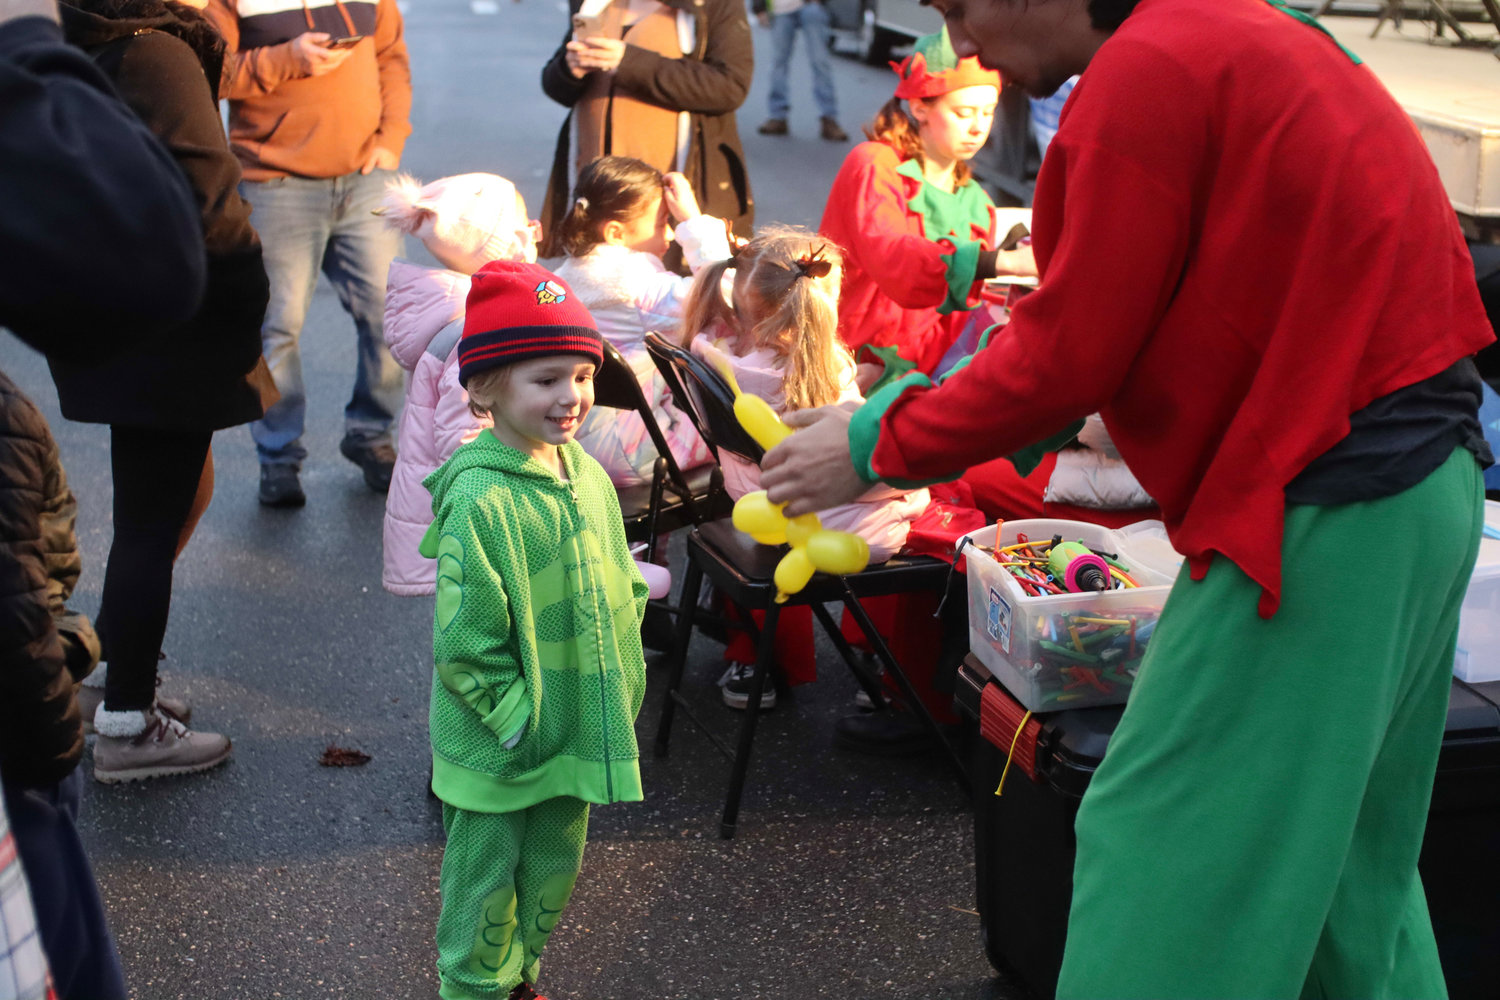 Four-year-old Dominic Avallone got excited as he watched an elf make a balloon animal for him.